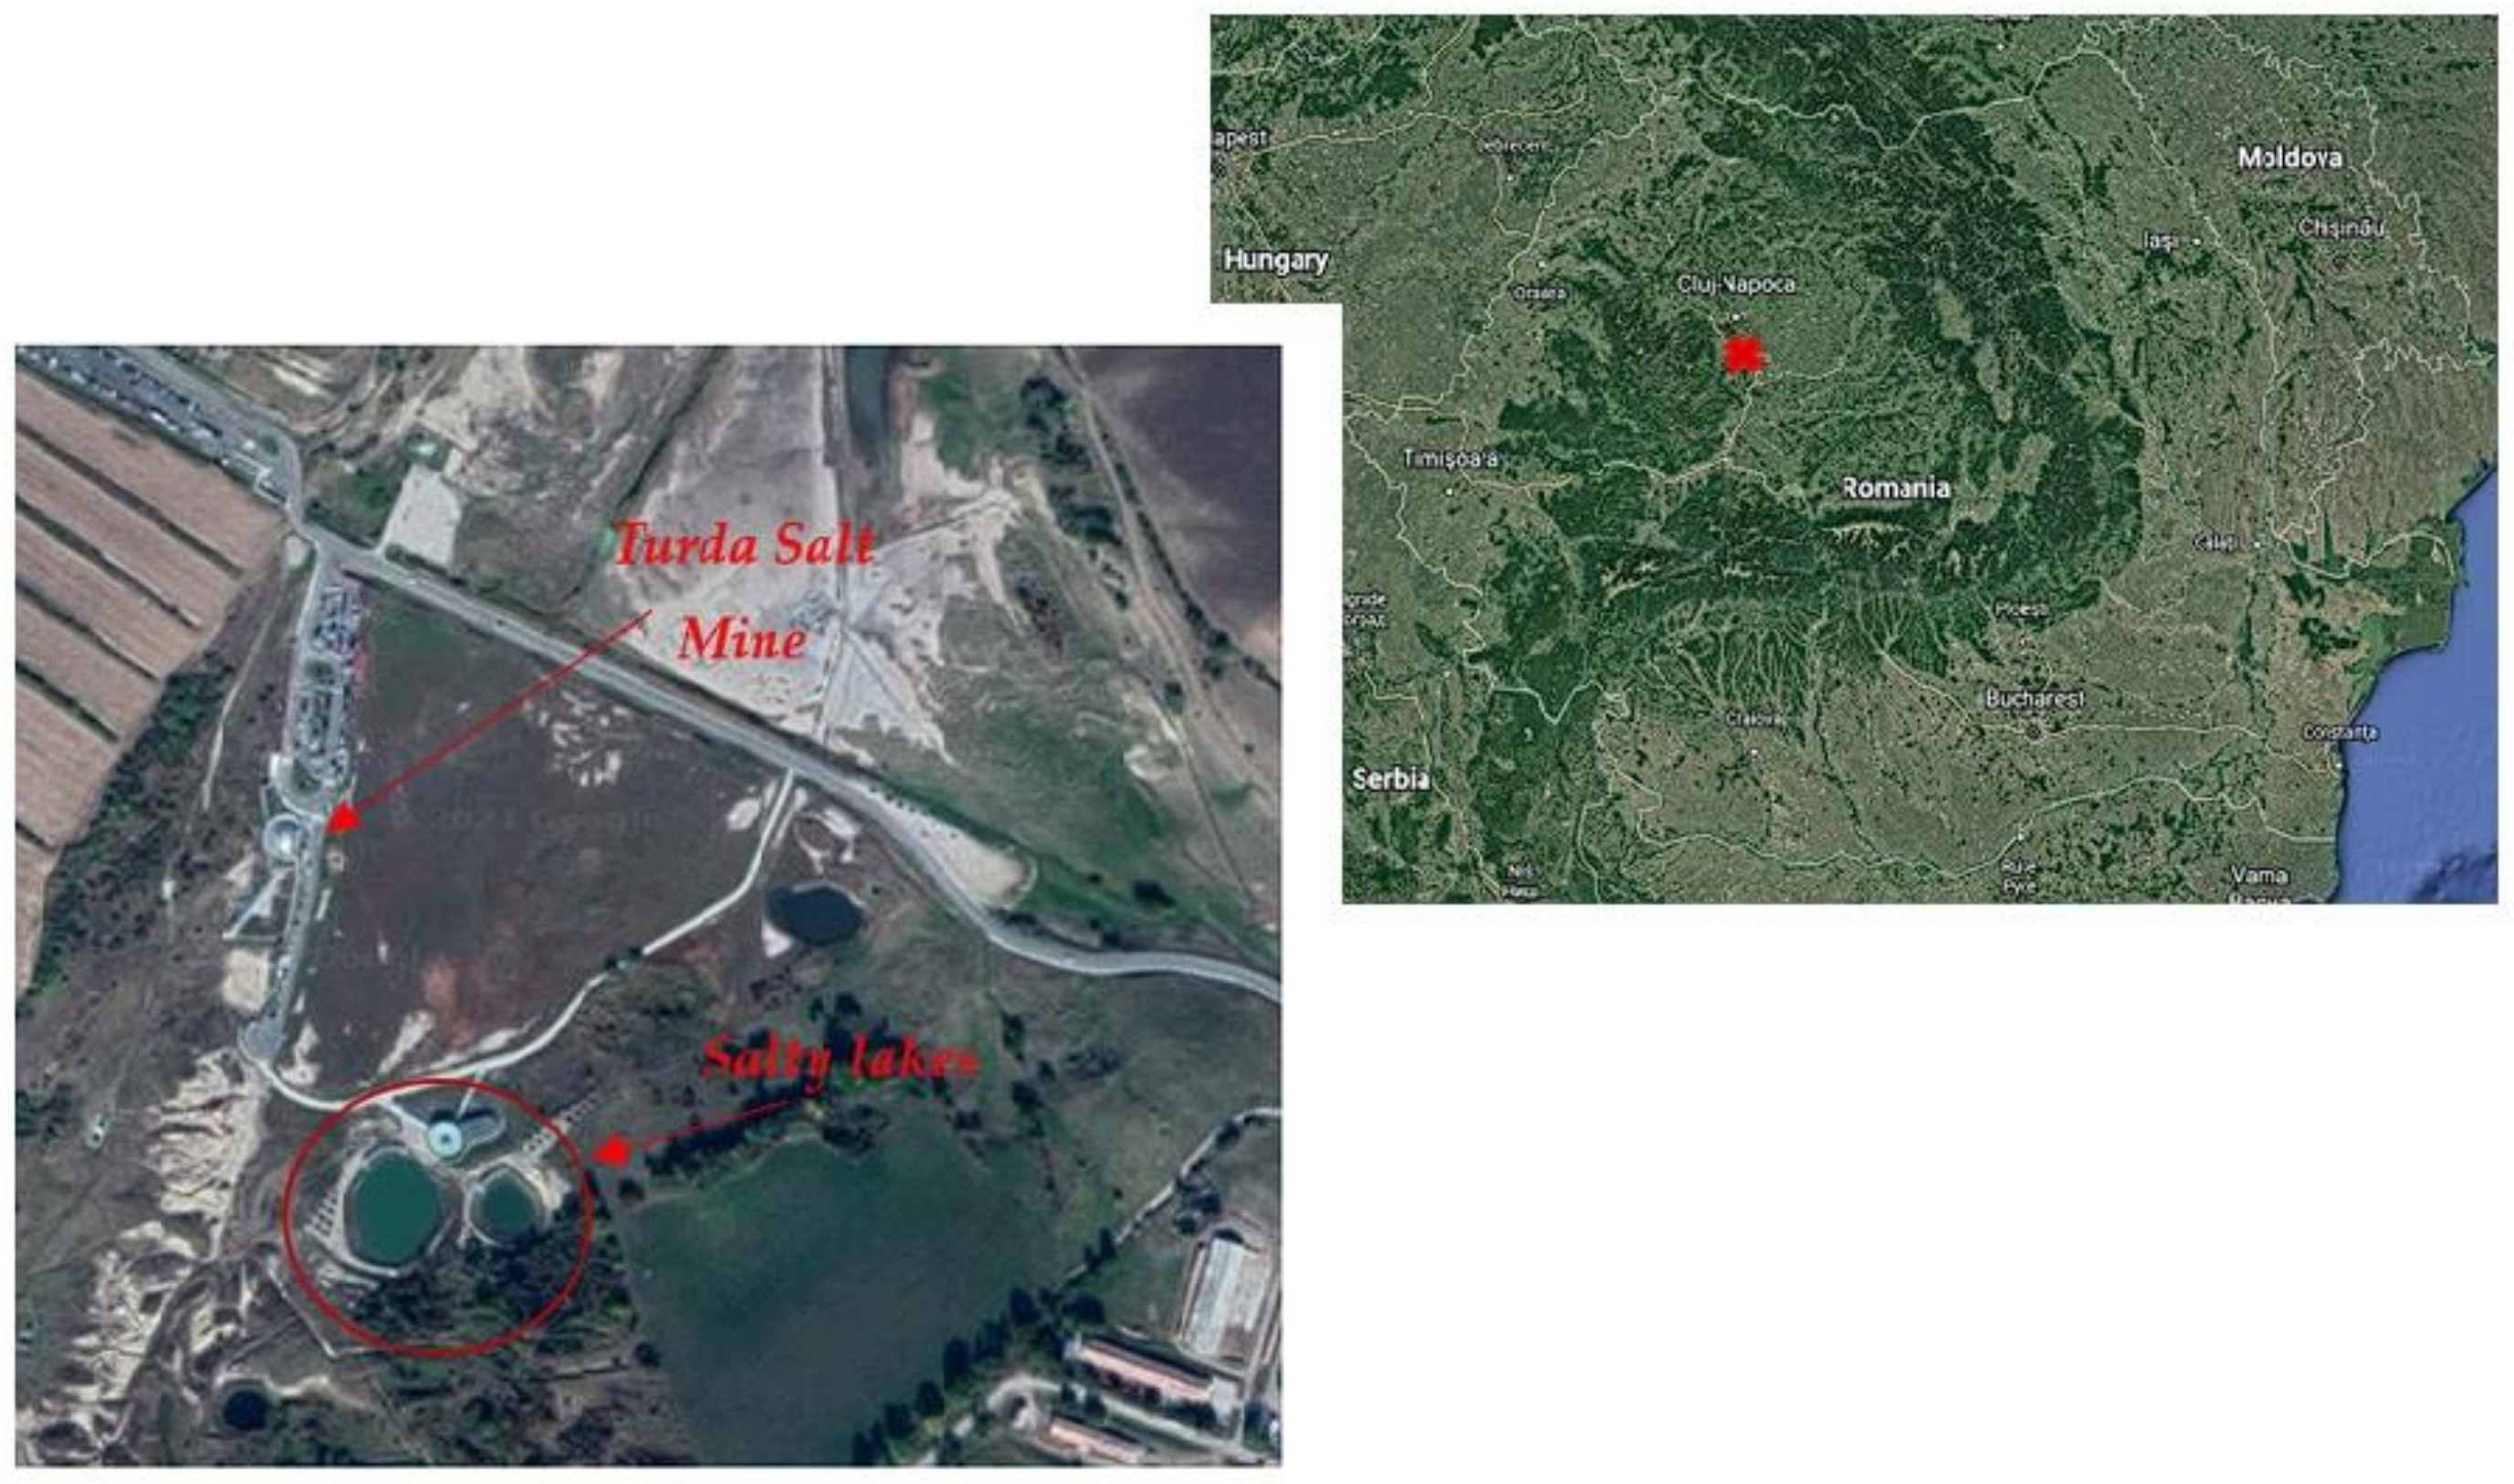 Water | Free Full-Text | Evaluation and Evolution of the Physico-Chemical  Parameters of Ocnei and Rotund Lakes Located near the &ldquo;Salina  Turda&rdquo; Mine, Romania | HTML